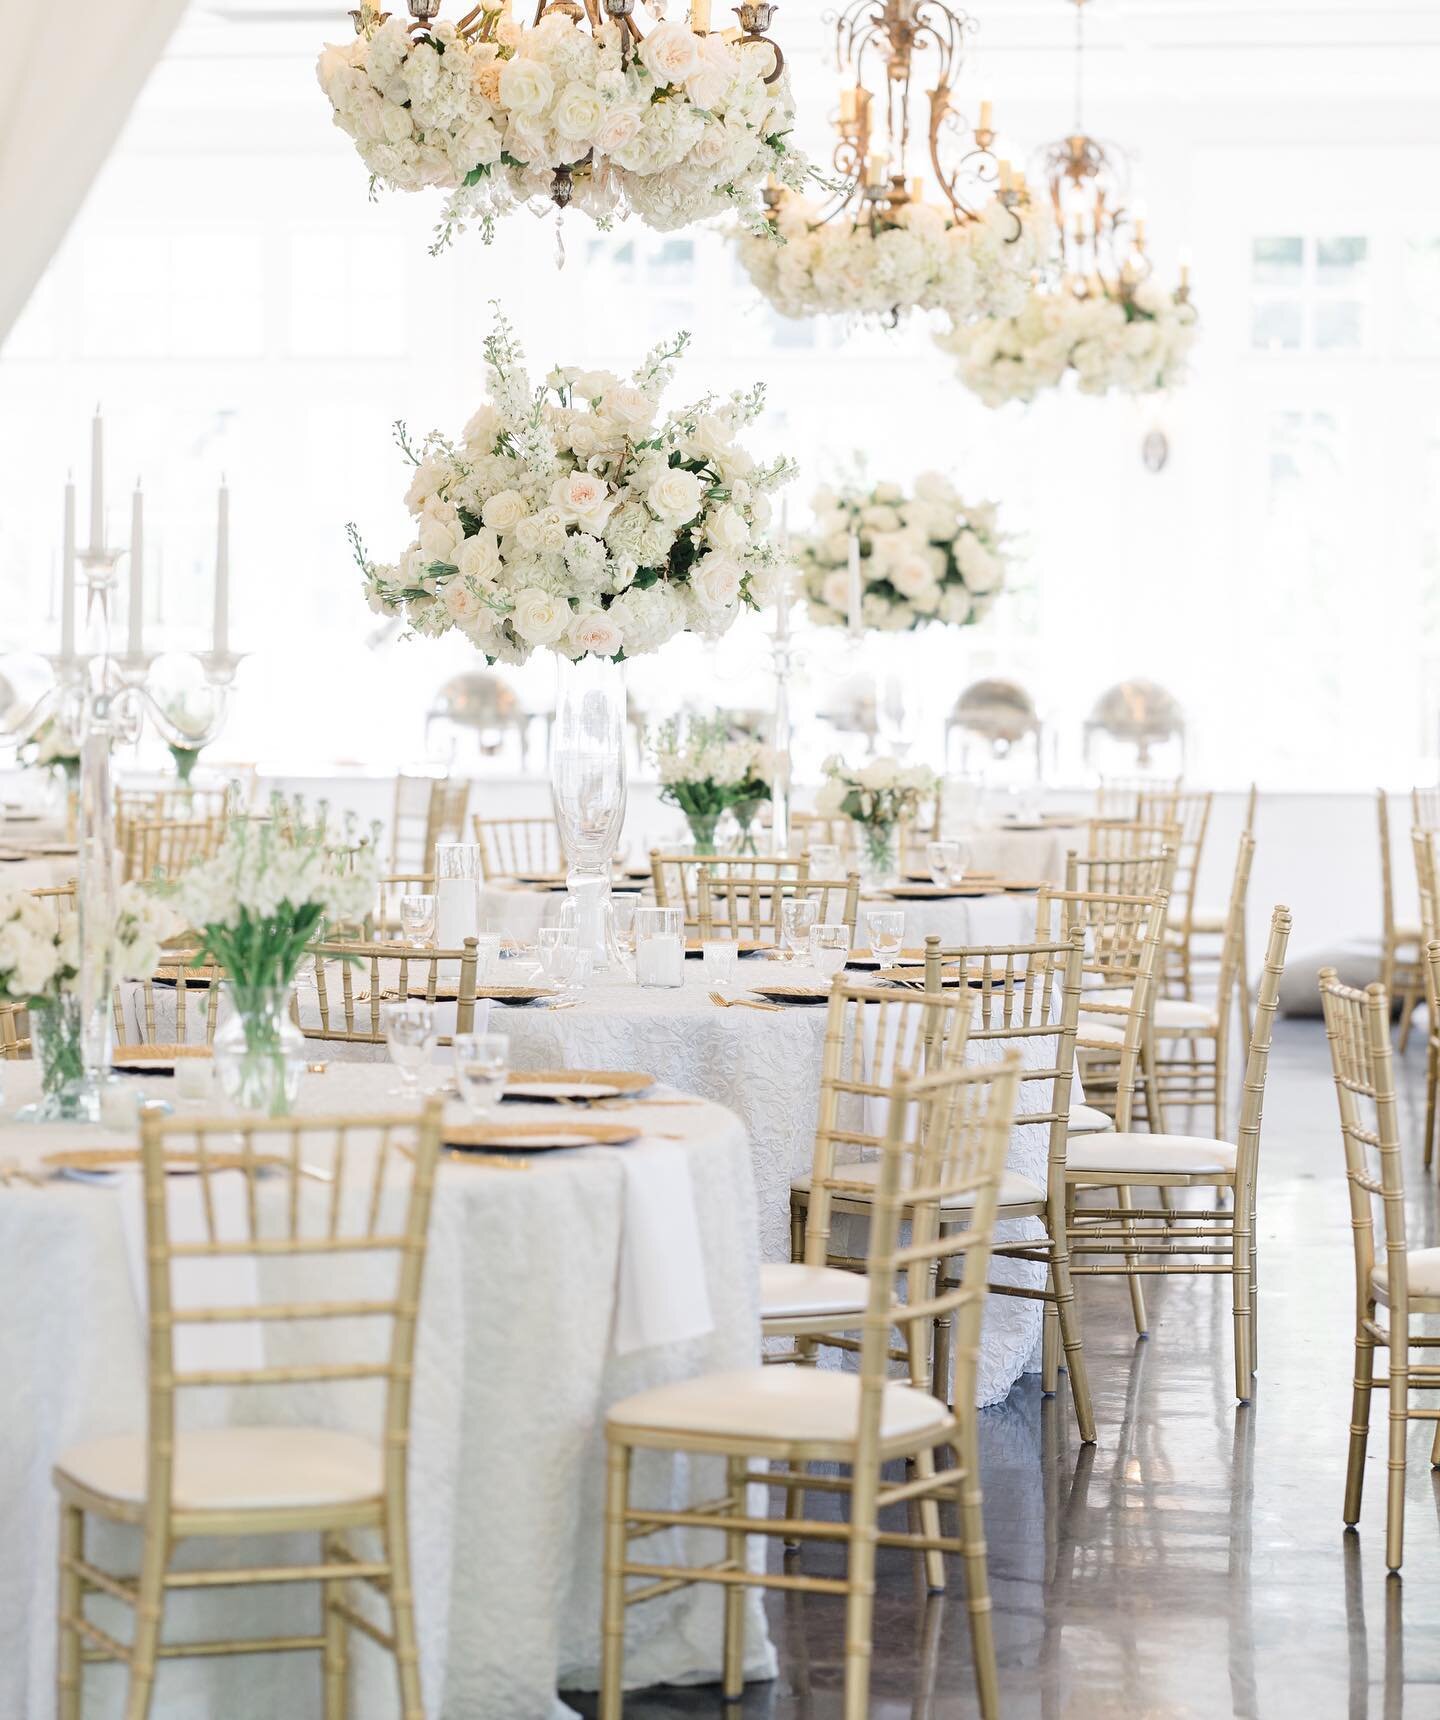 Beyond our *wildest dreams*. ✨

Only fair that we would reference Taylor&rsquo;s 1989 album today. 🥳

Photography: @jennalindseyphotos 
Flowers: @luxeandbloomatl 
Venue: @littleriverfarms 
Papers: @rlcreativeco 
Linens: @idolinens 

#atlantaweddingp